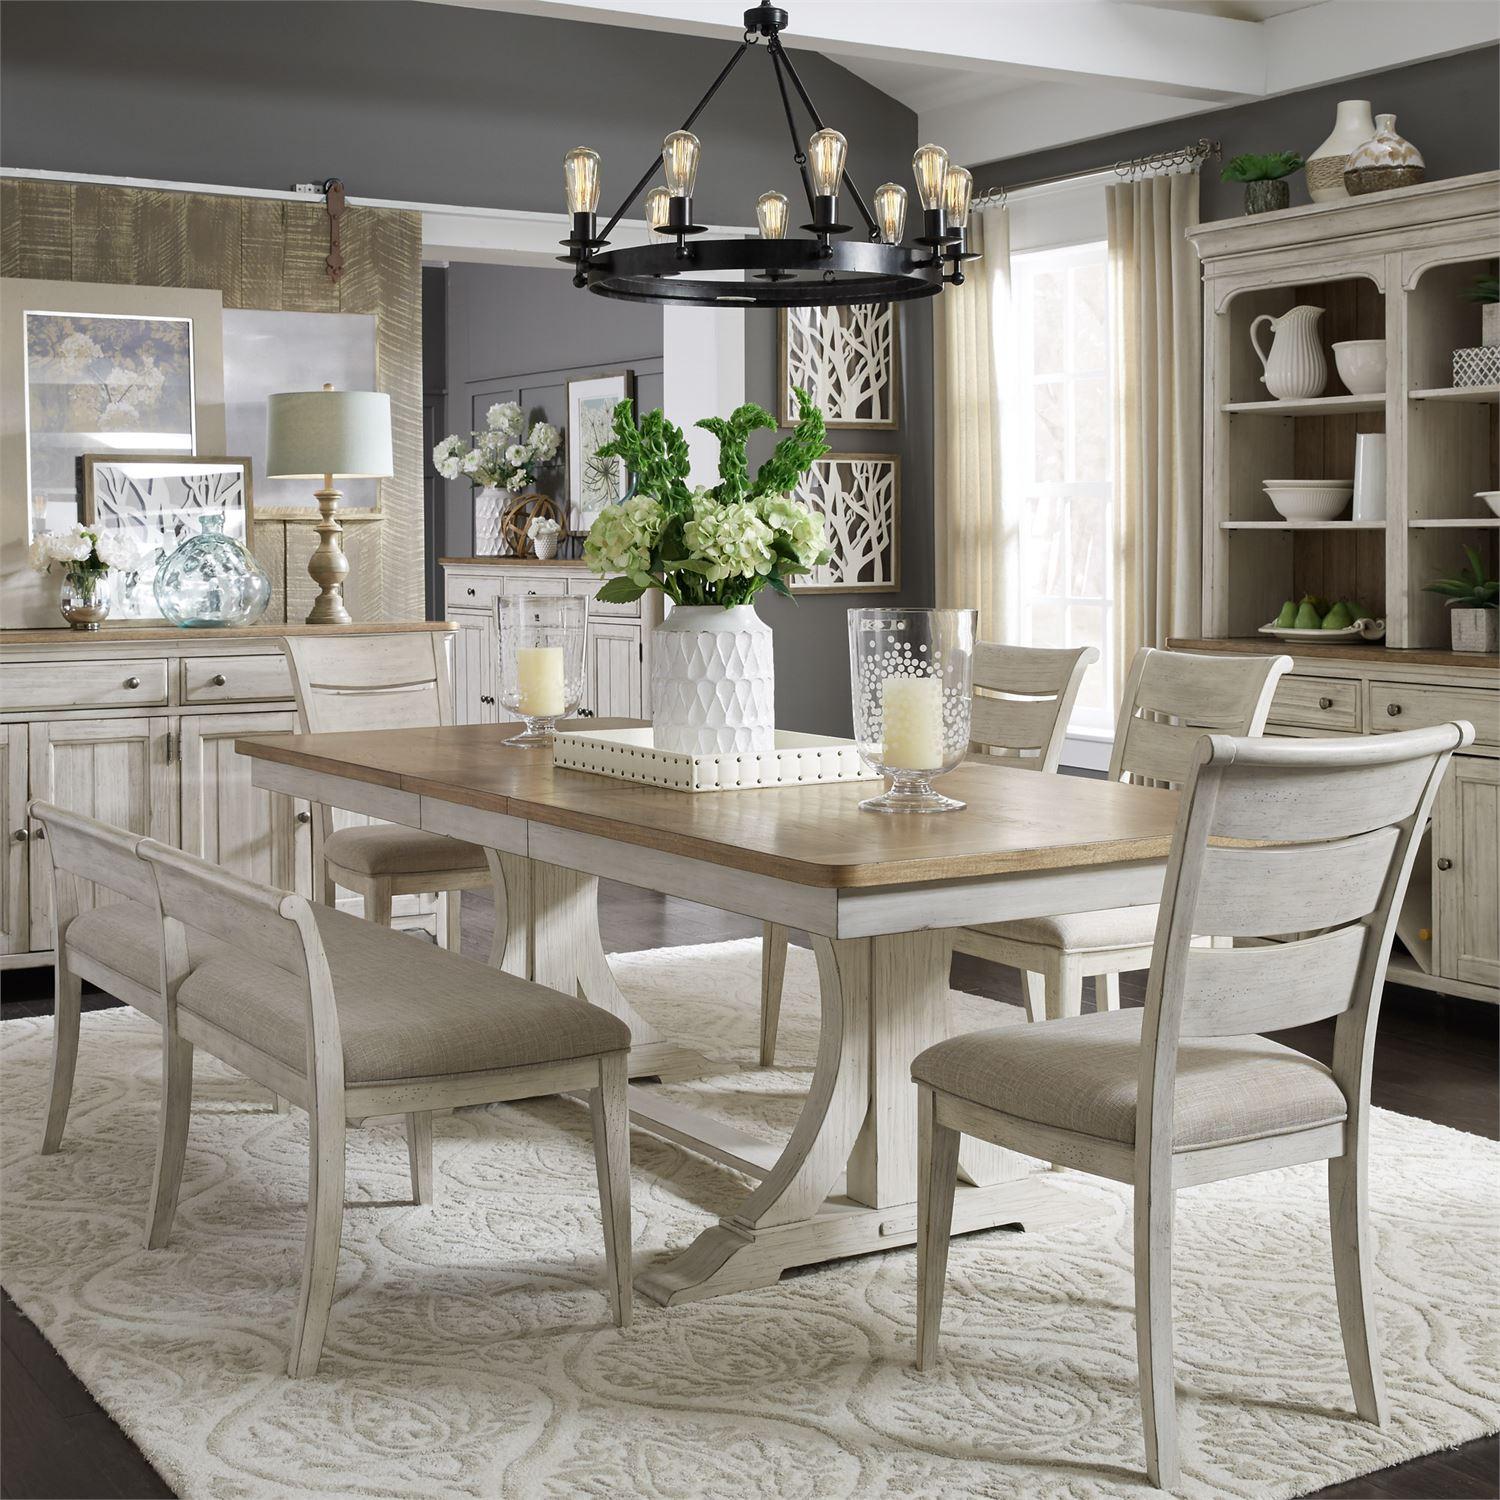 Farmhouse Dining Room Set Farmhouse Reimagined  (652-DR) Dining Room Set 652-DR-O6TRS in White Fabric